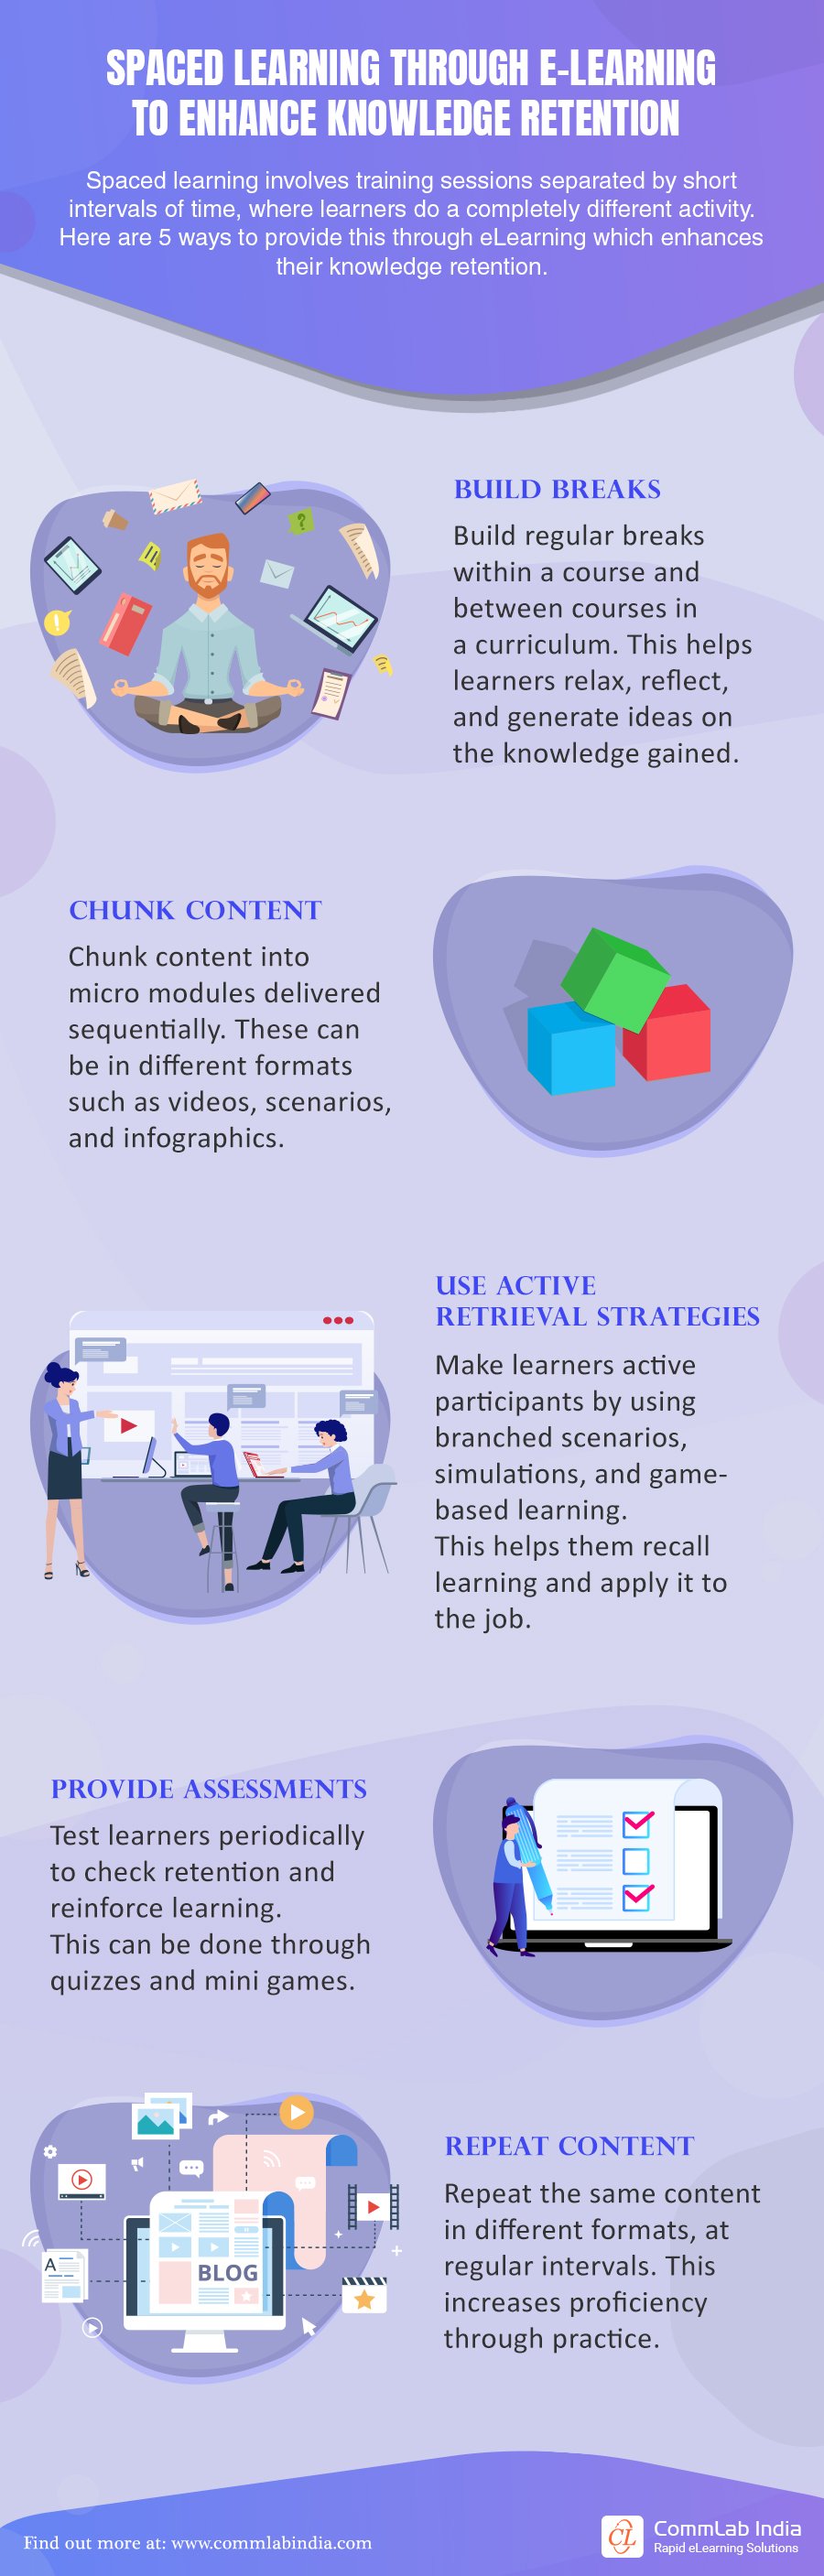 5 Effective Ways to Incorporate Spaced Learning in E-Learning [Infographic]